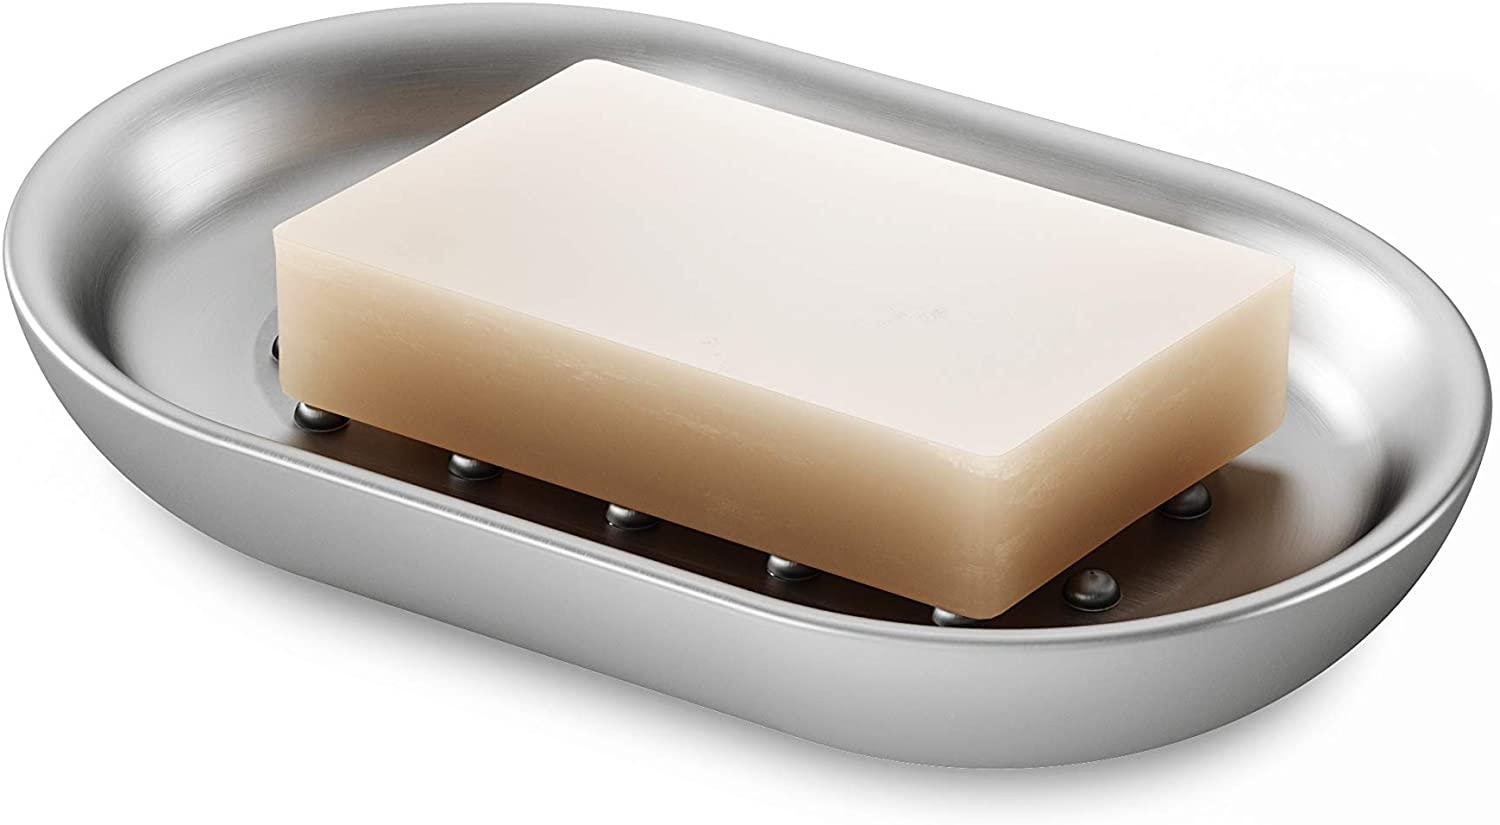 Umbra Stainless Steel Normal Soap Dish